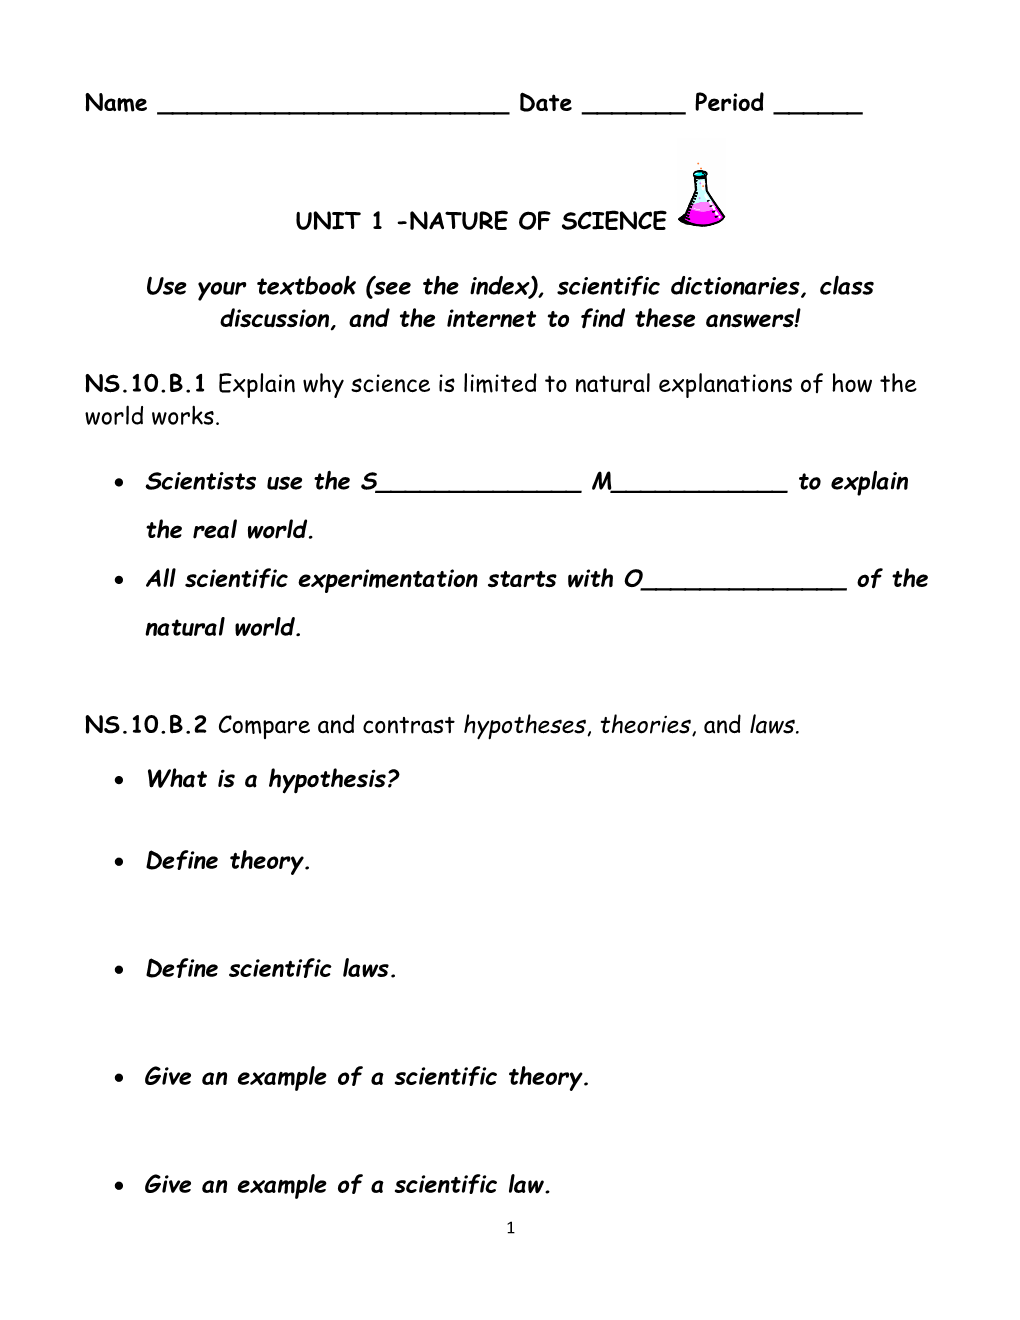 NS.10.B.1 Explain Why Science Is Limited to Natural Explanations of How the World Works